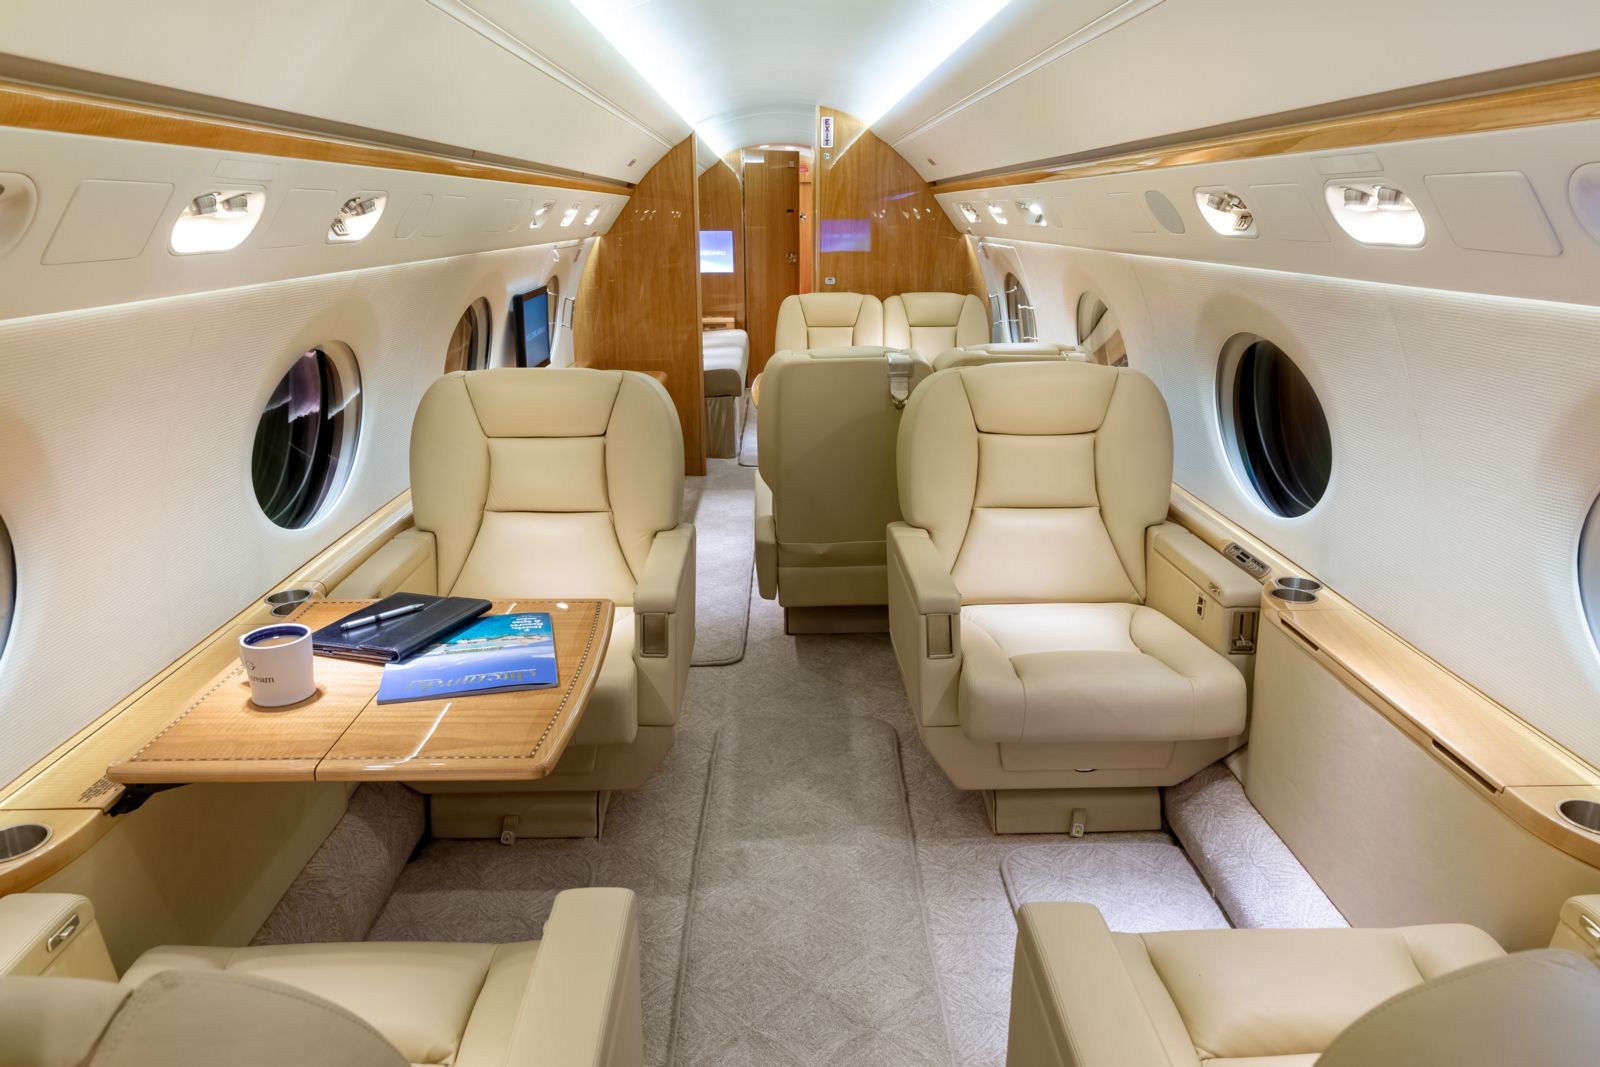 Gulfstream G550  S/N 5370 for sale | gallery image: /userfiles/images/G550_sn5370/fwd%20aft.jpg